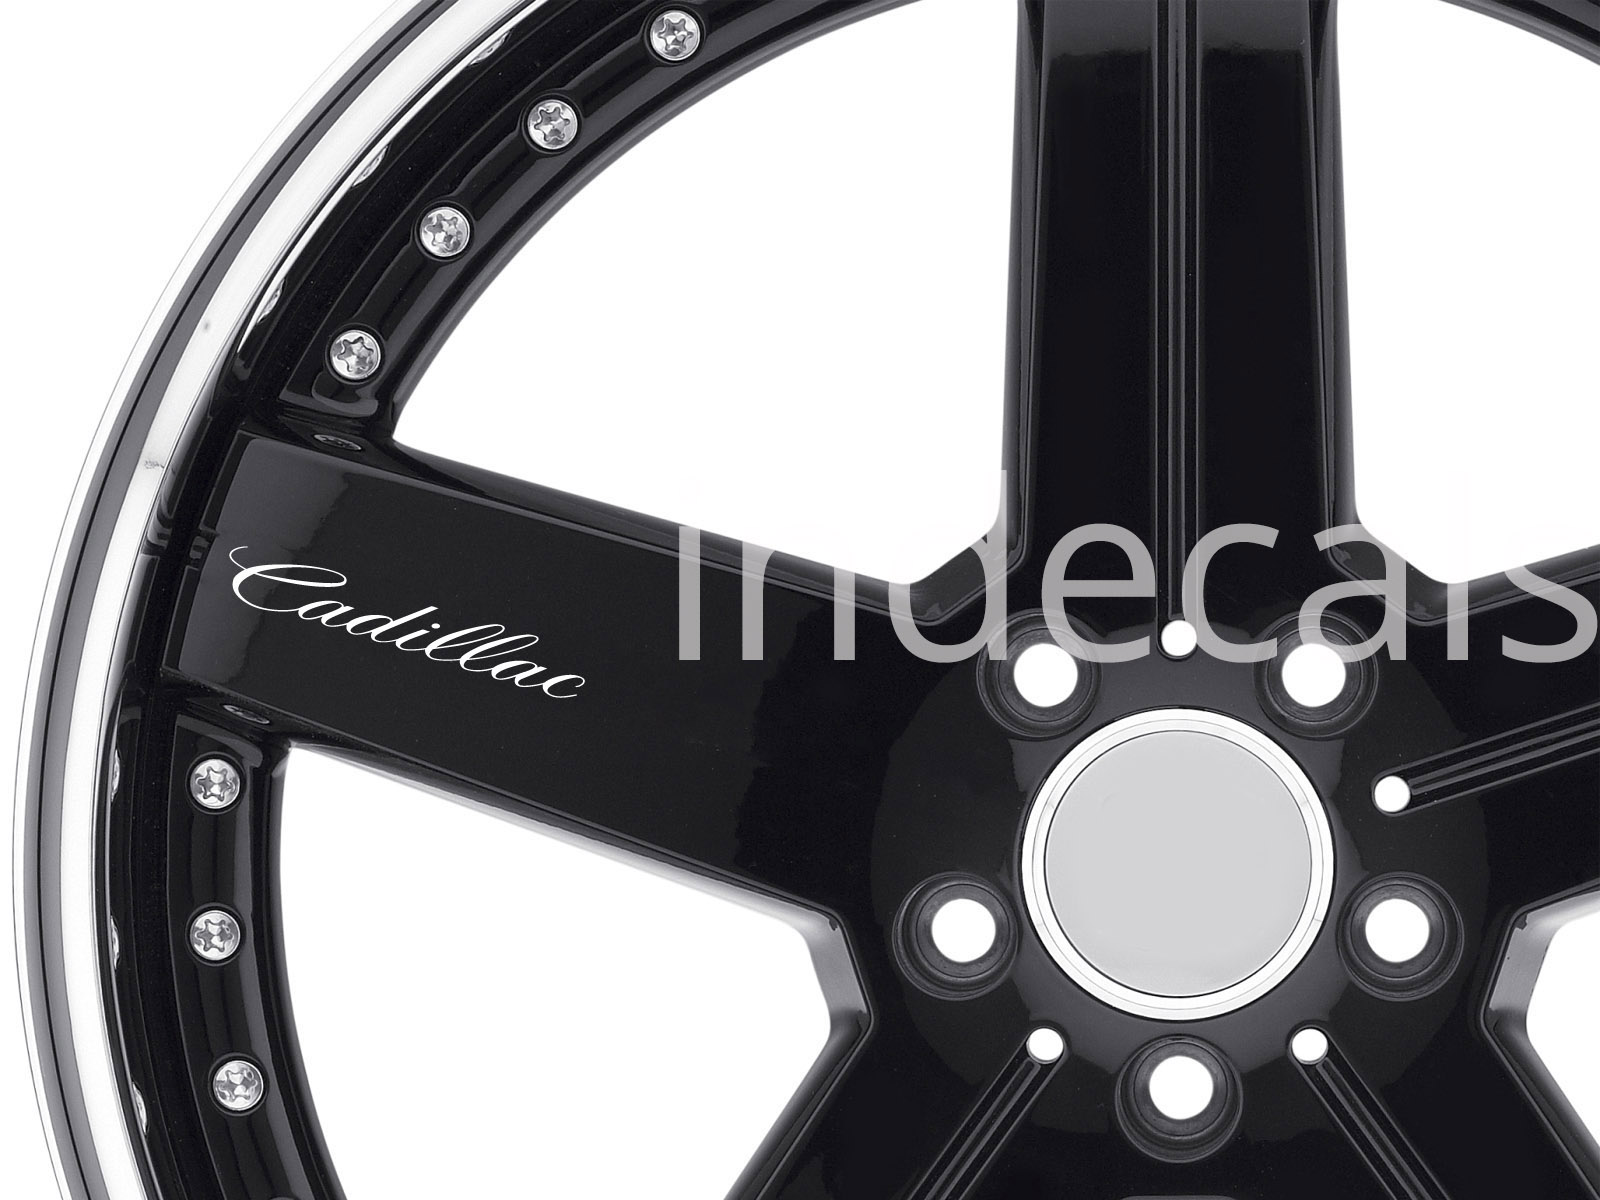 6 x Cadillac Stickers for Wheels - White